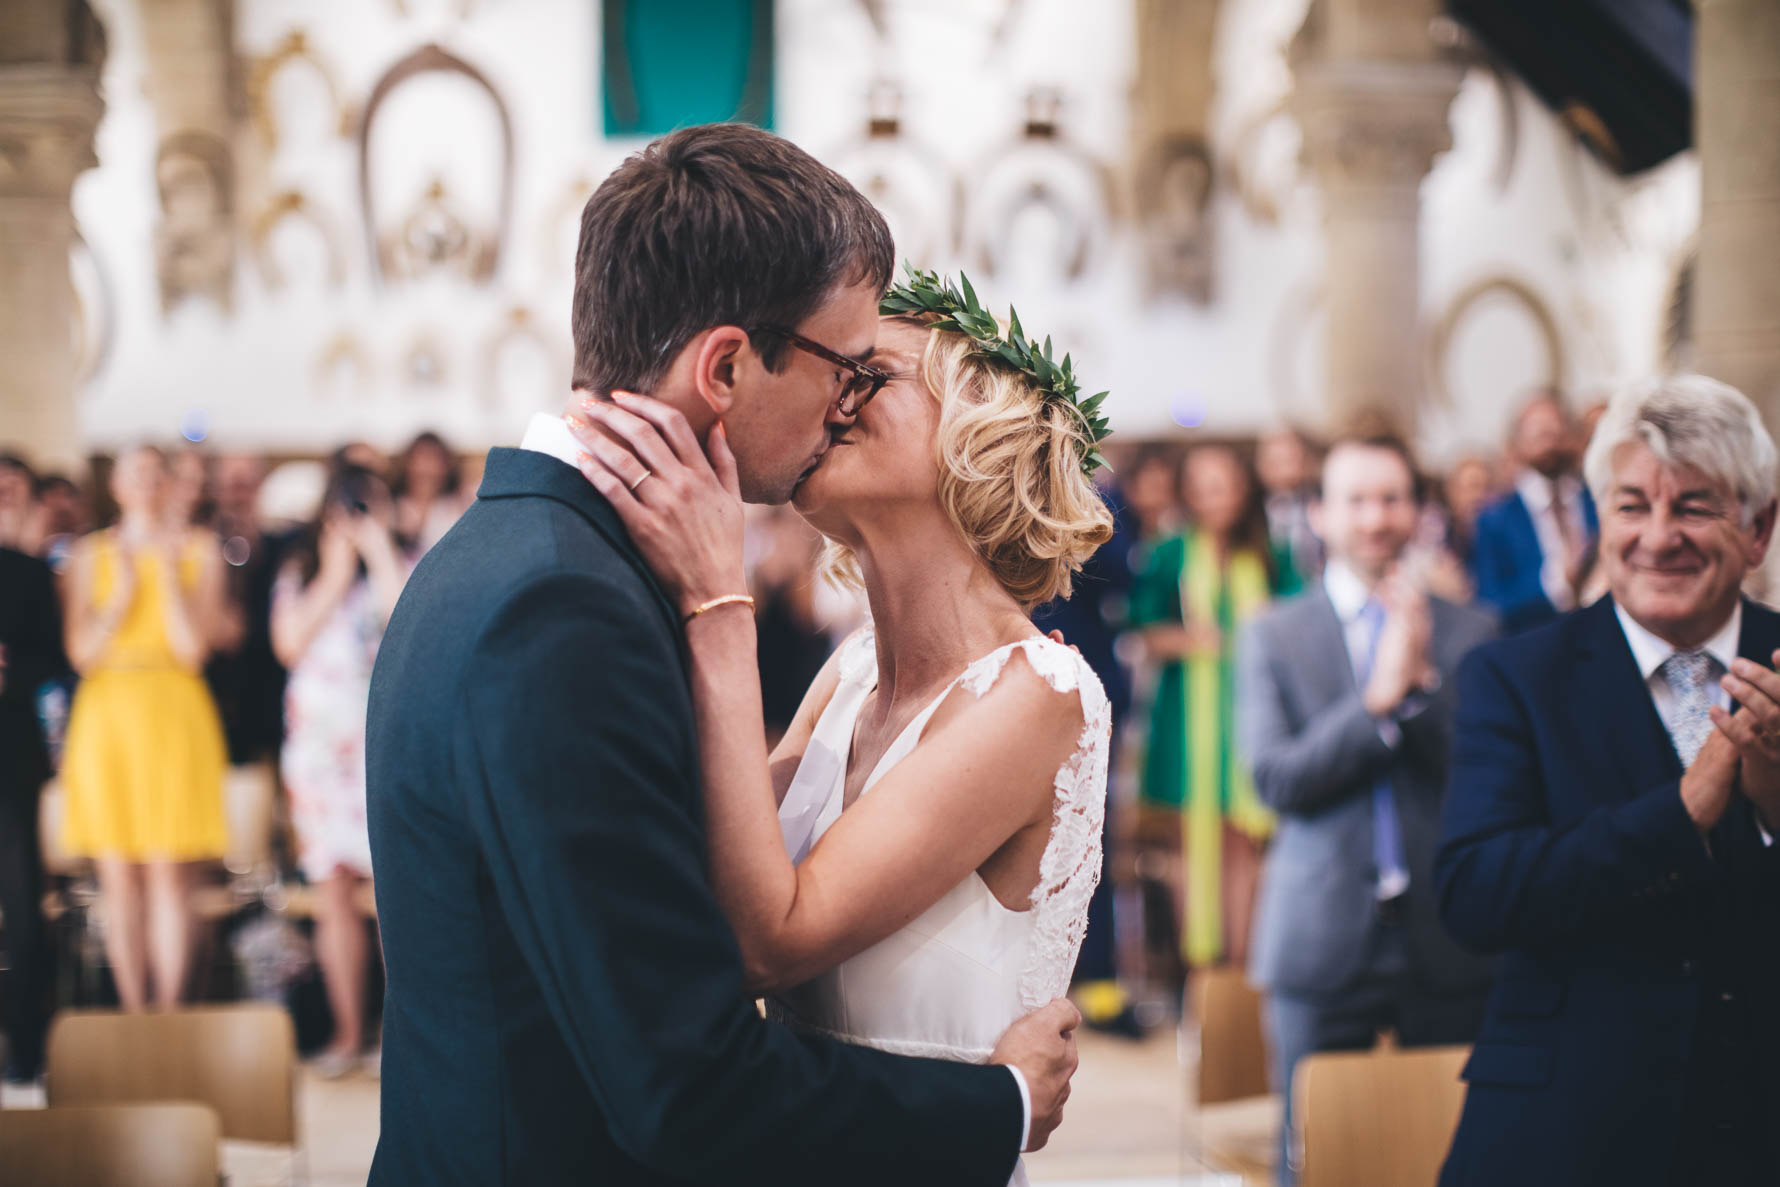 Bride and groom having their first kiss after getting married at the Great Hall at Oakham Castle with the wedding party in the background applauding